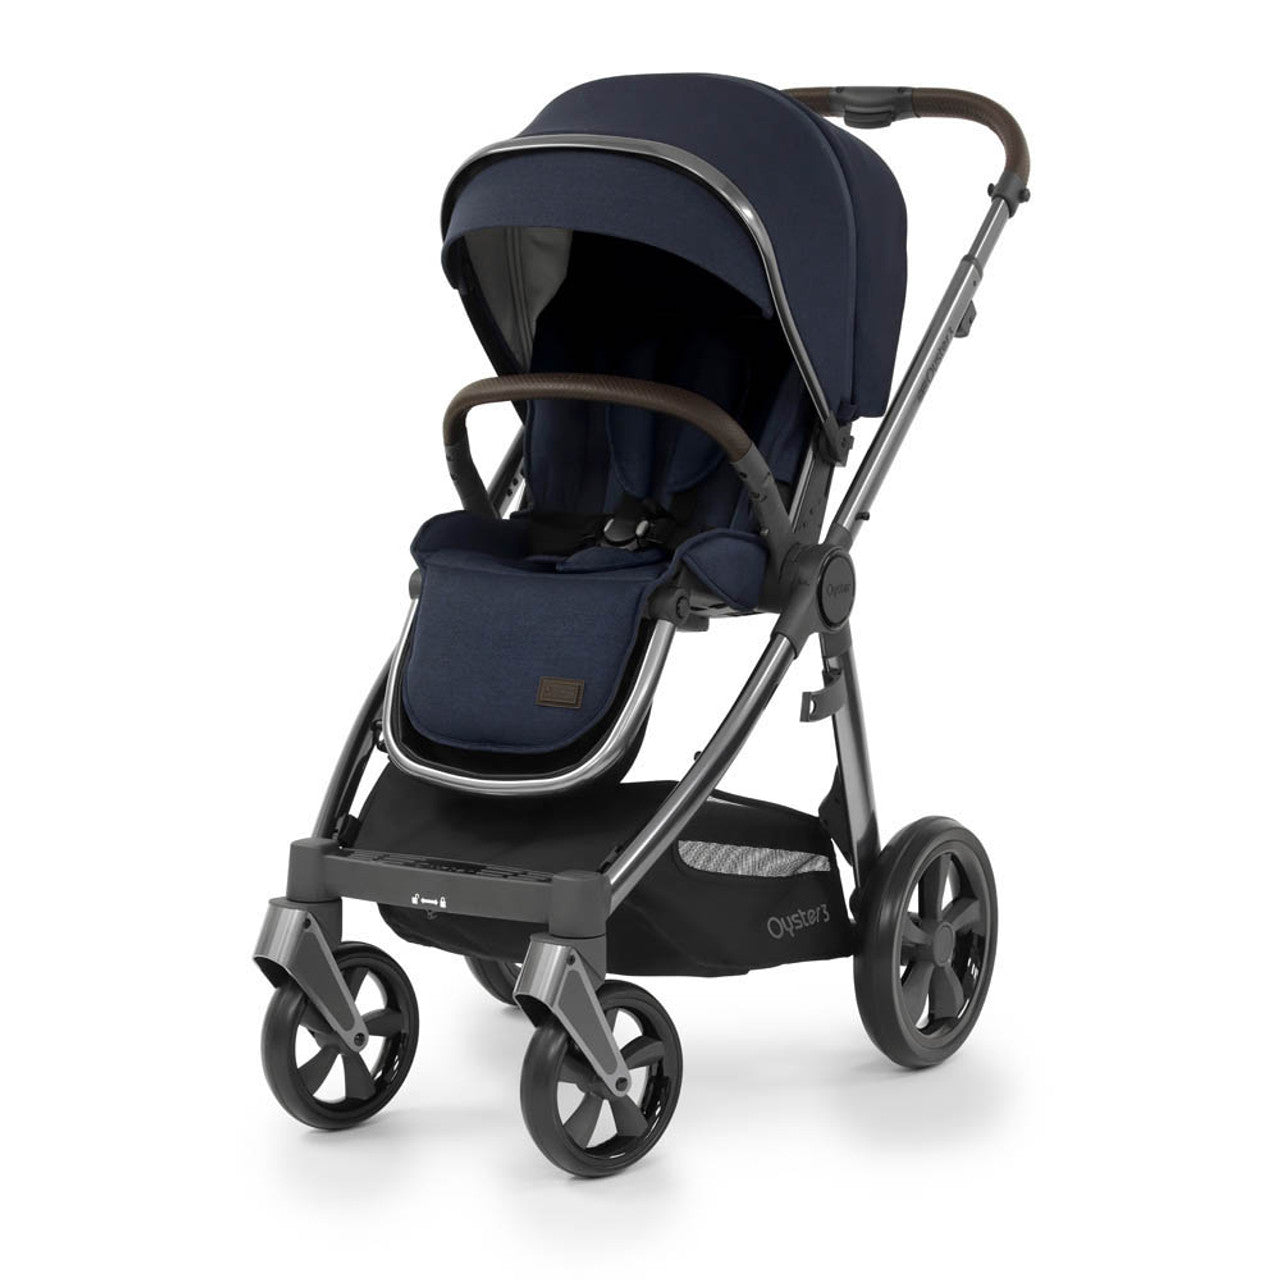 Babystyle Oyster 3 Pushchair - Gun Metal Chassis/Twilight